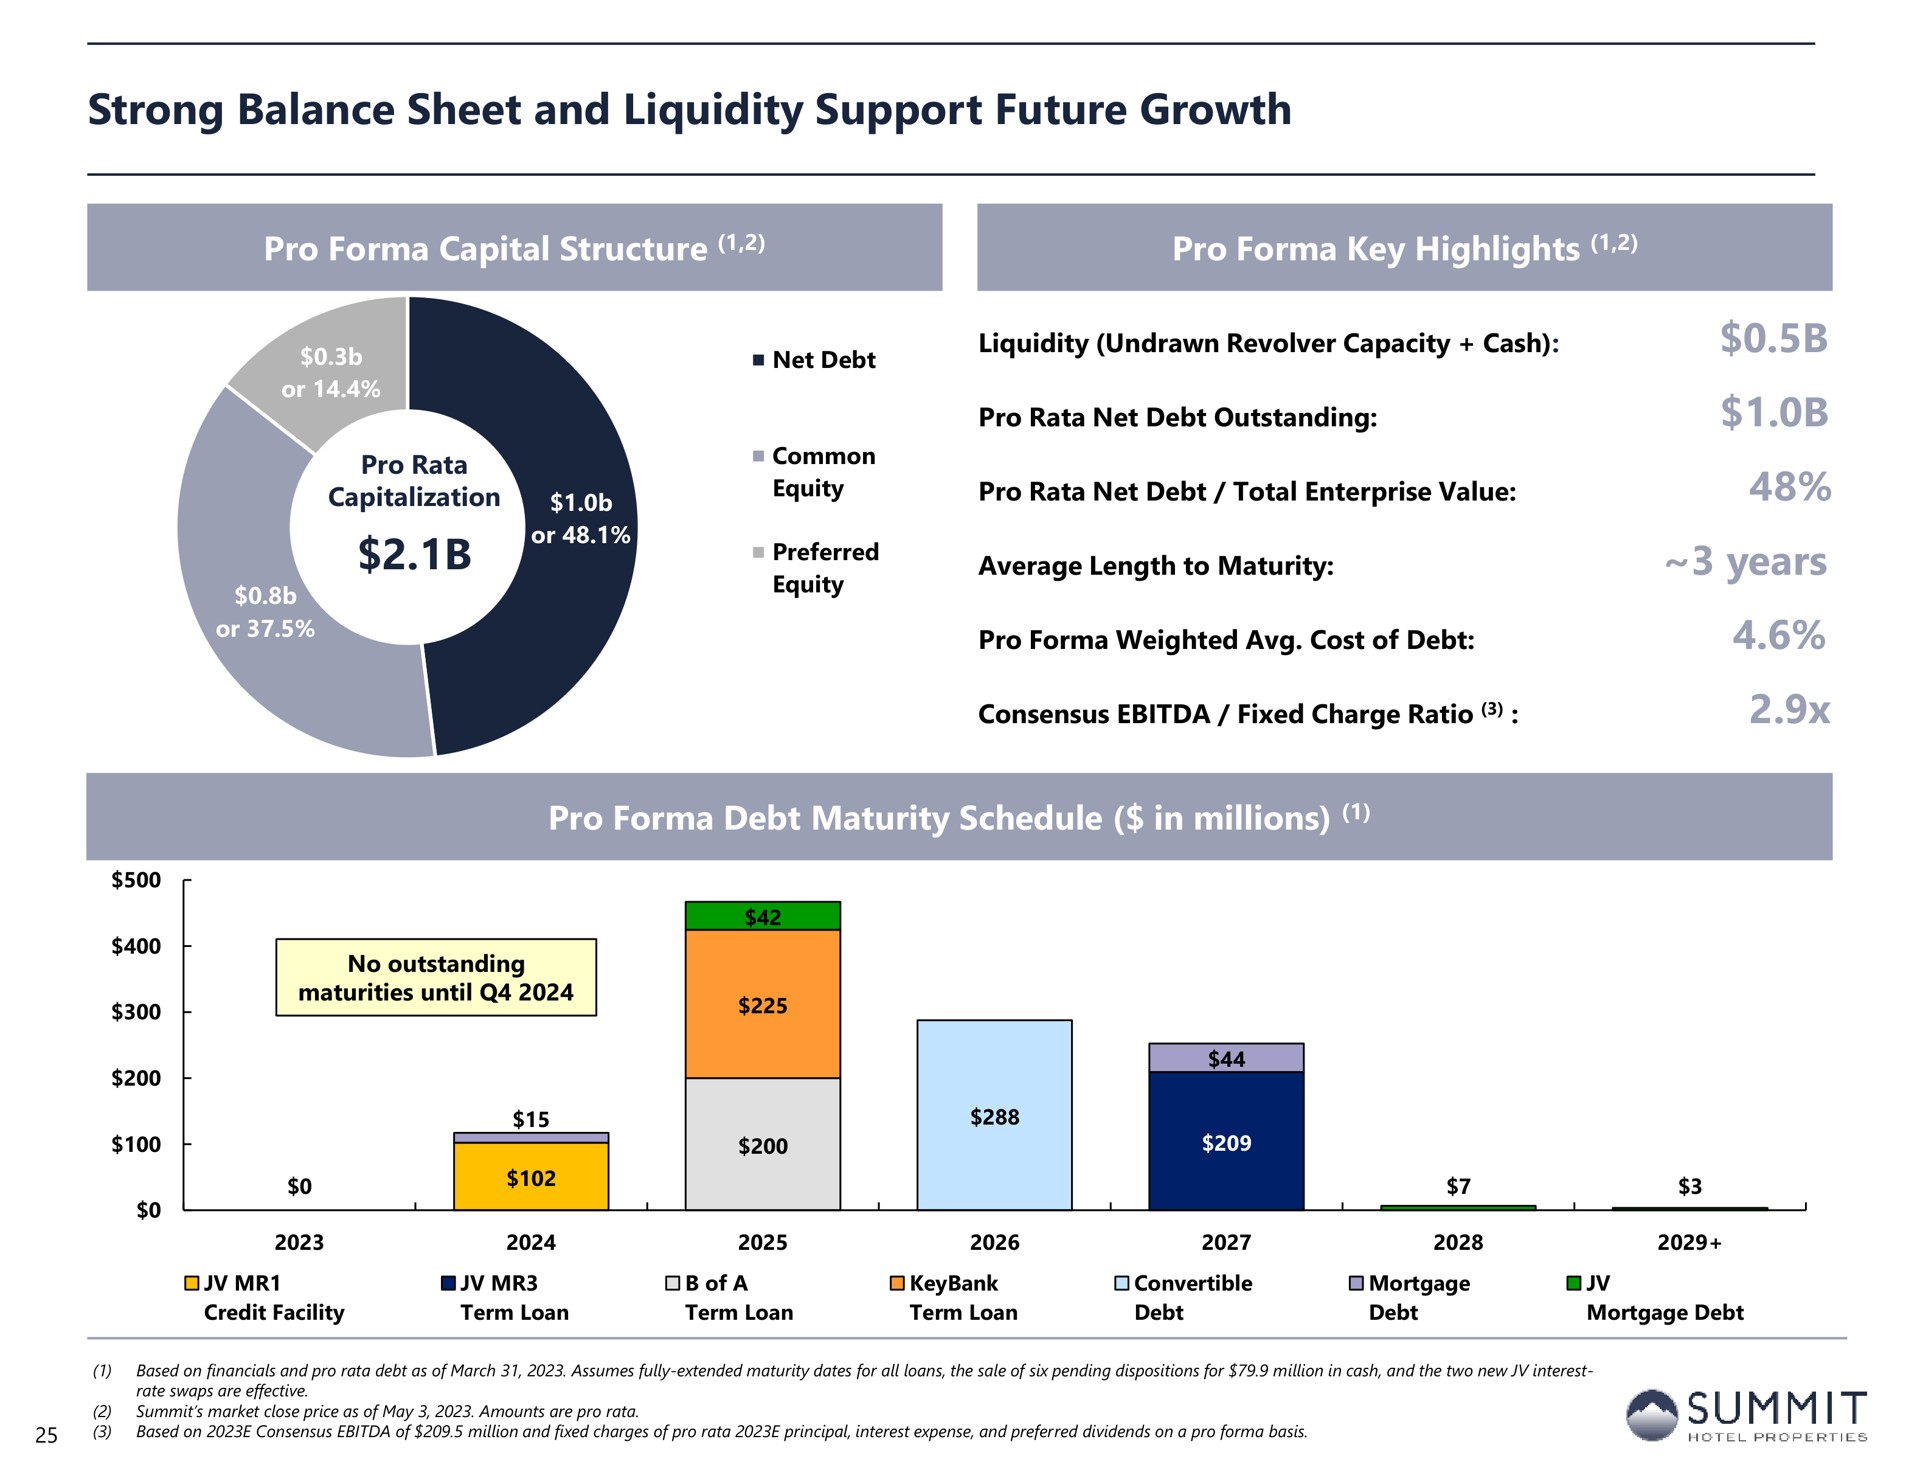 strong balance sheet and liquidity support future growth years | Summit Hotel Properties